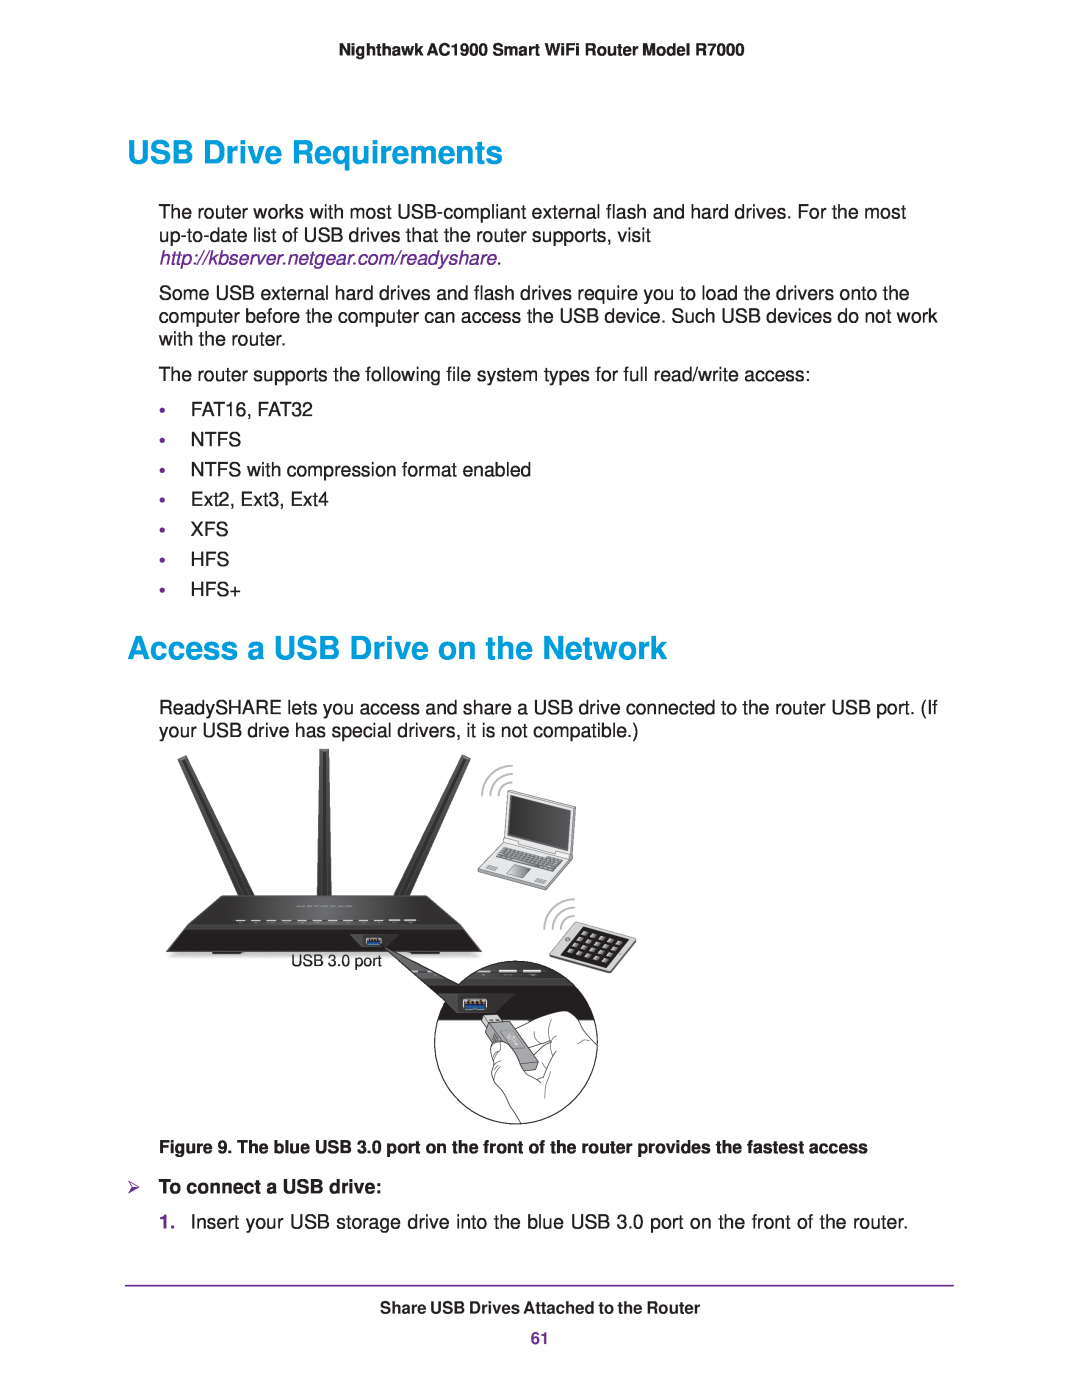 NETGEAR R7000 user manual USB Drive Requirements, Access a USB Drive on the Network,  To connect a USB drive 